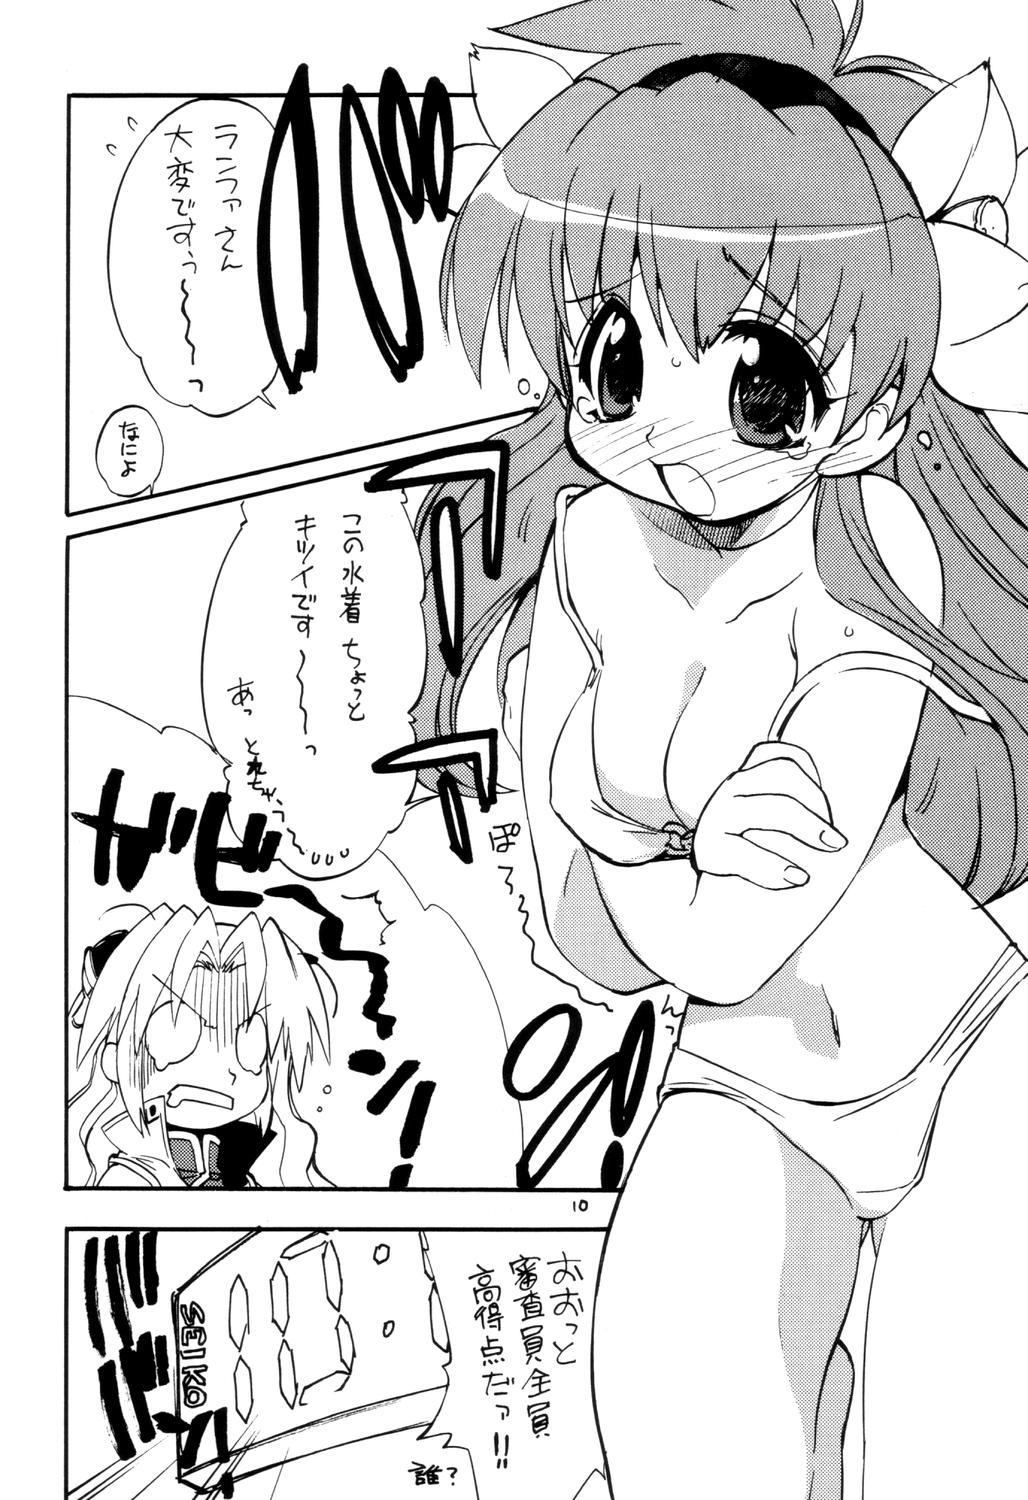 Unshaved Mamagult Galaxy 3 - Galaxy angel Di gi charat Amatures Gone Wild - Page 9